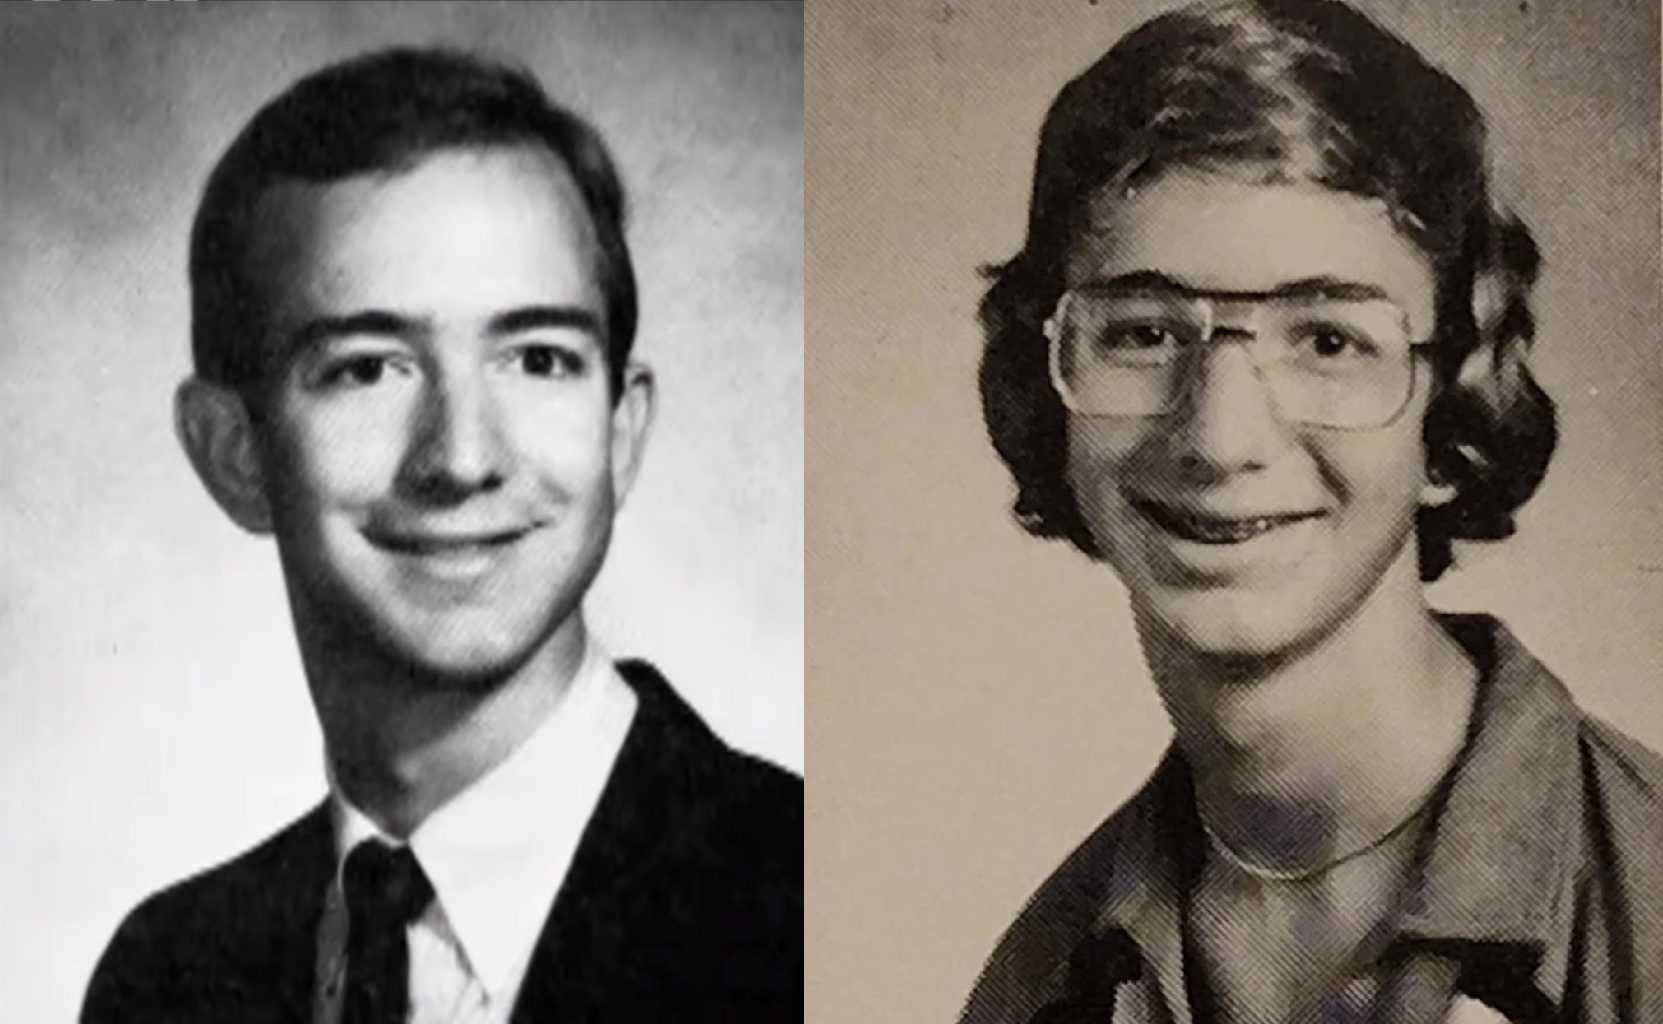 Young Jeff Bezos with hair